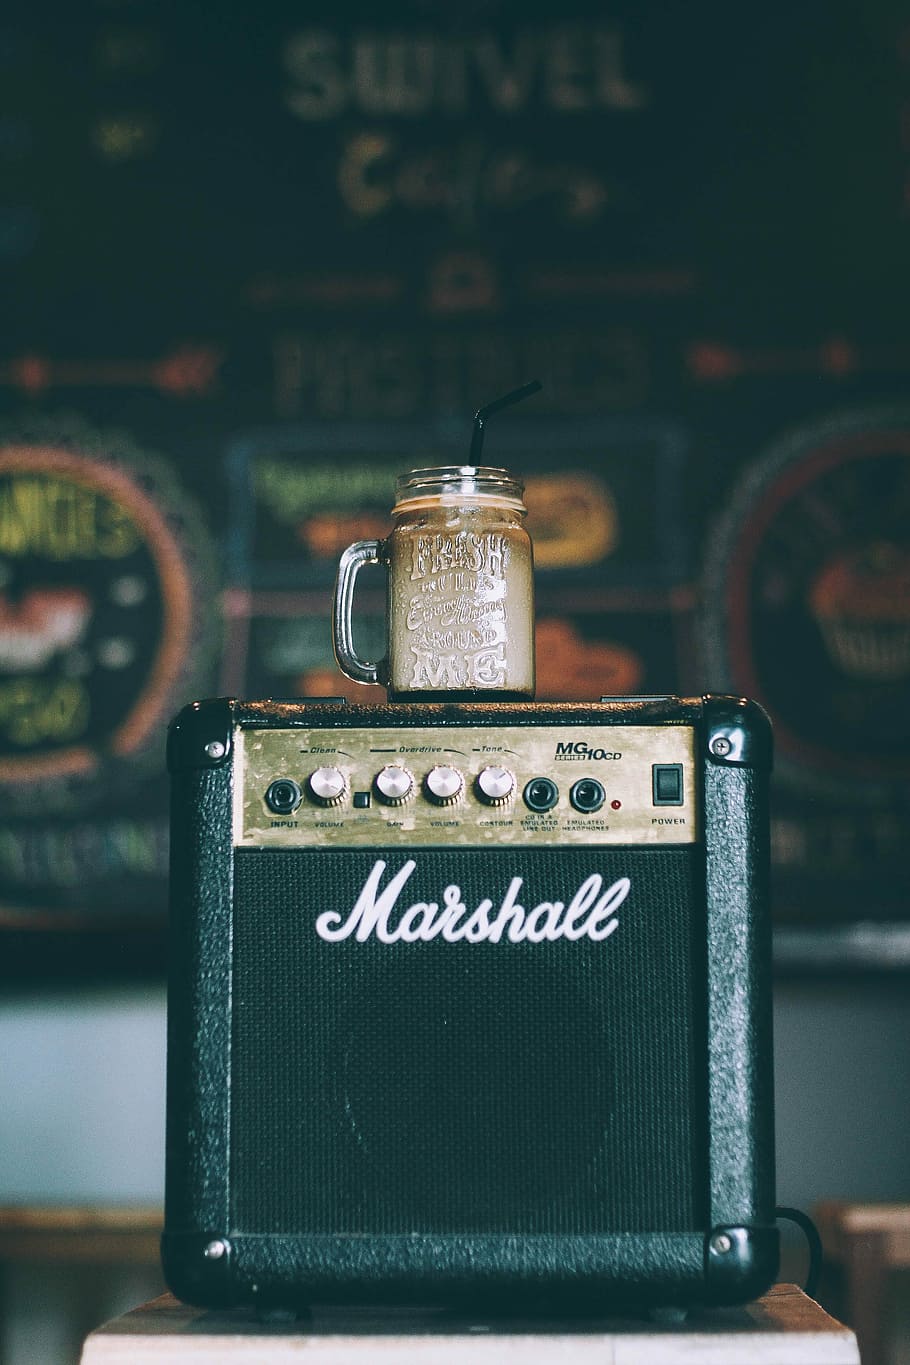 black Marshall guitar amplifier with glass mug on top filled with beverage, clear glass mason jar with coffee on black Marshall guitar amplifier